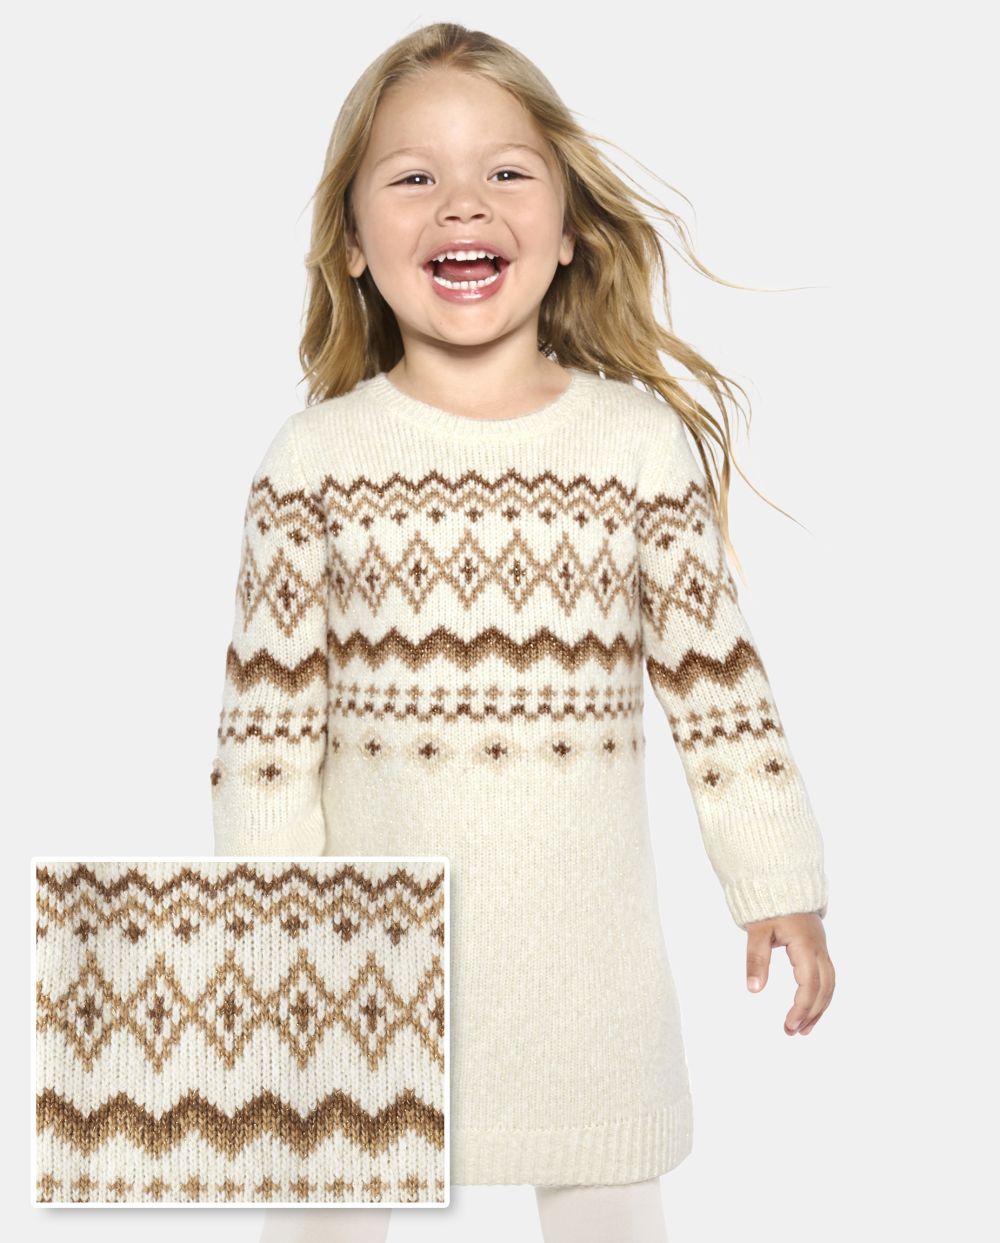 Tall Toddler Baby Long Sleeves Crew Neck Sweater Above the Knee Dress